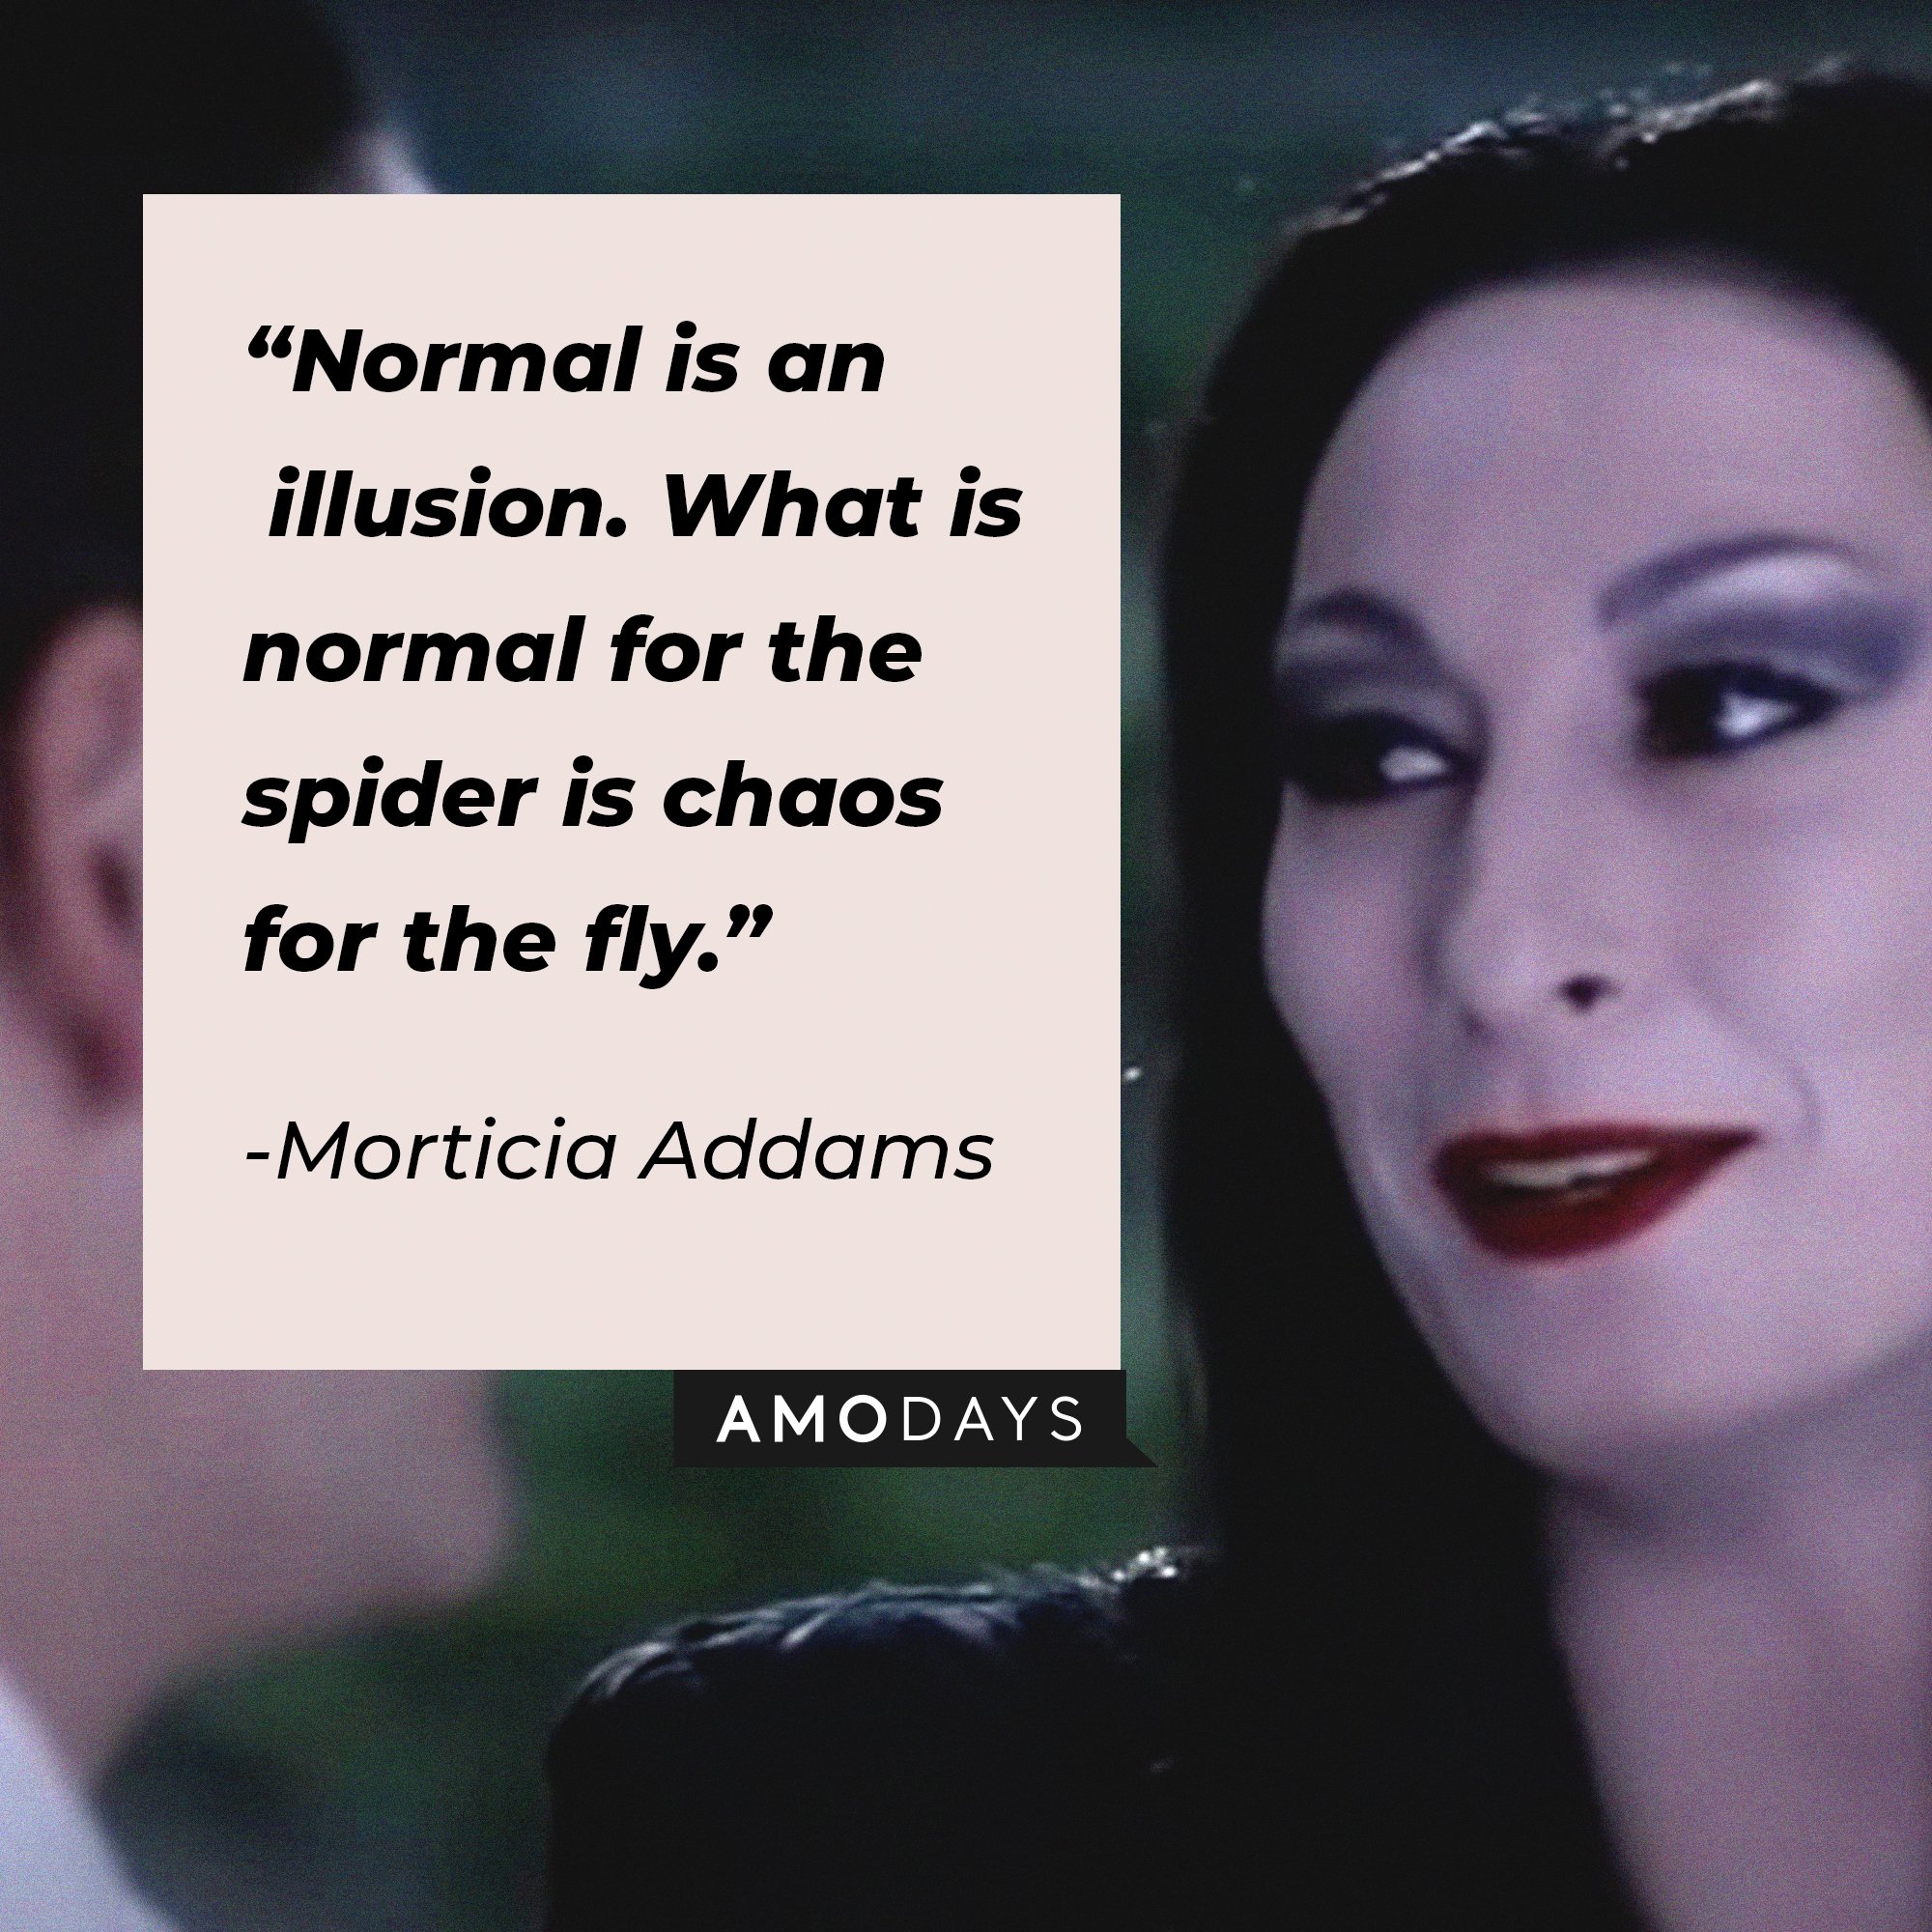 Morticia Addams’ quote: “Normal is an illusion. What is normal for the spider is chaos for the fly.” | Image: AmoDays  